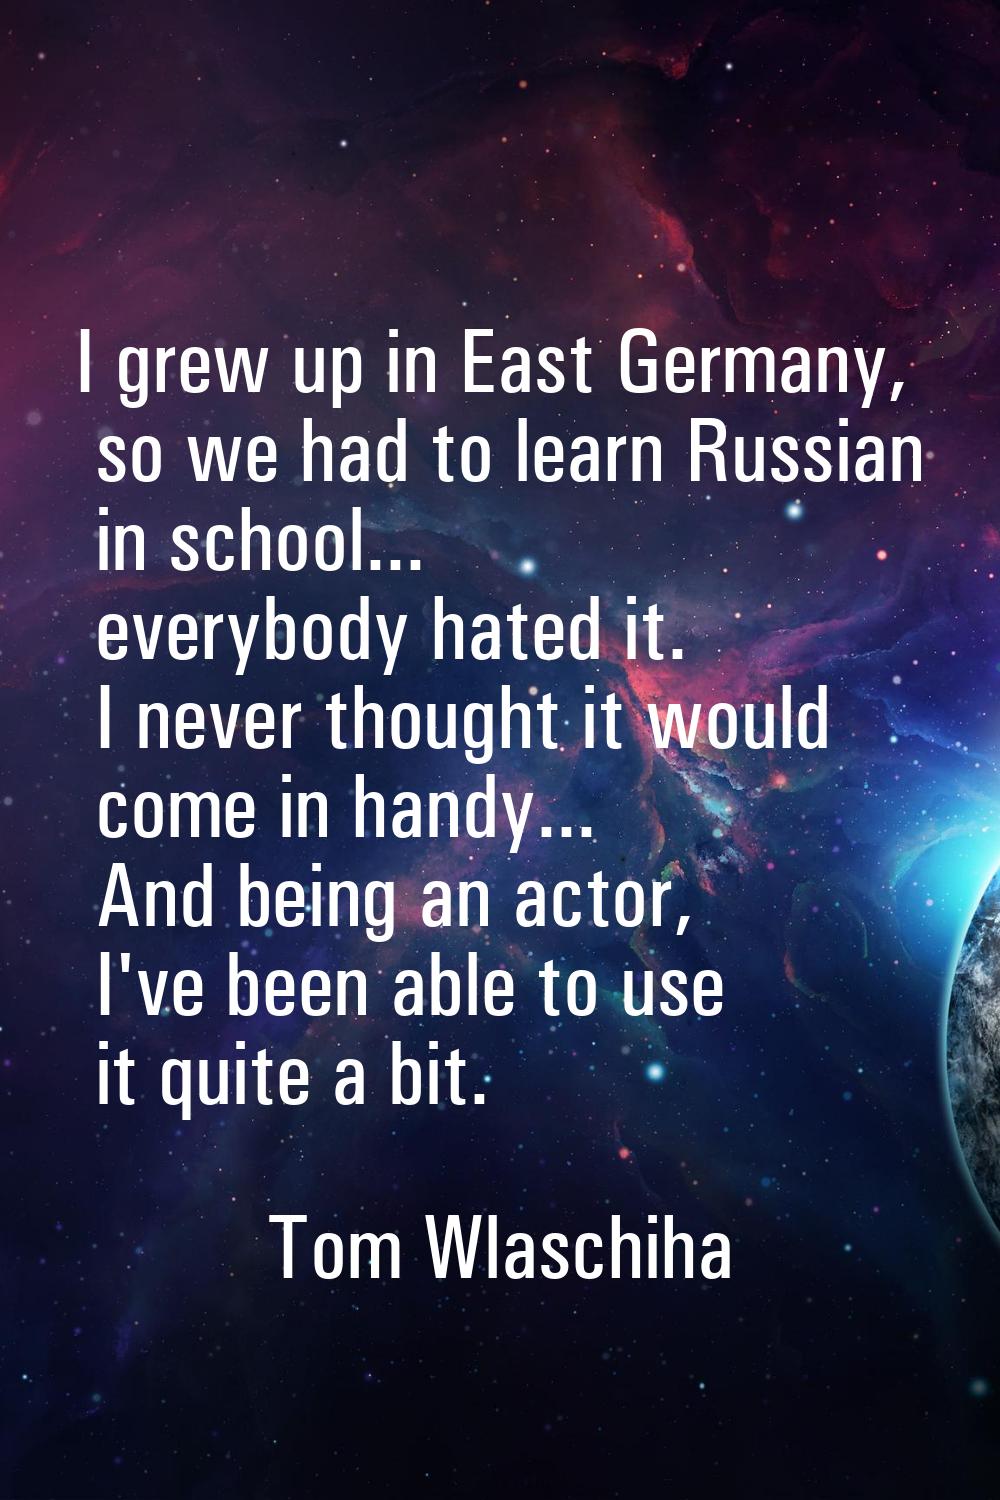 I grew up in East Germany, so we had to learn Russian in school... everybody hated it. I never thou